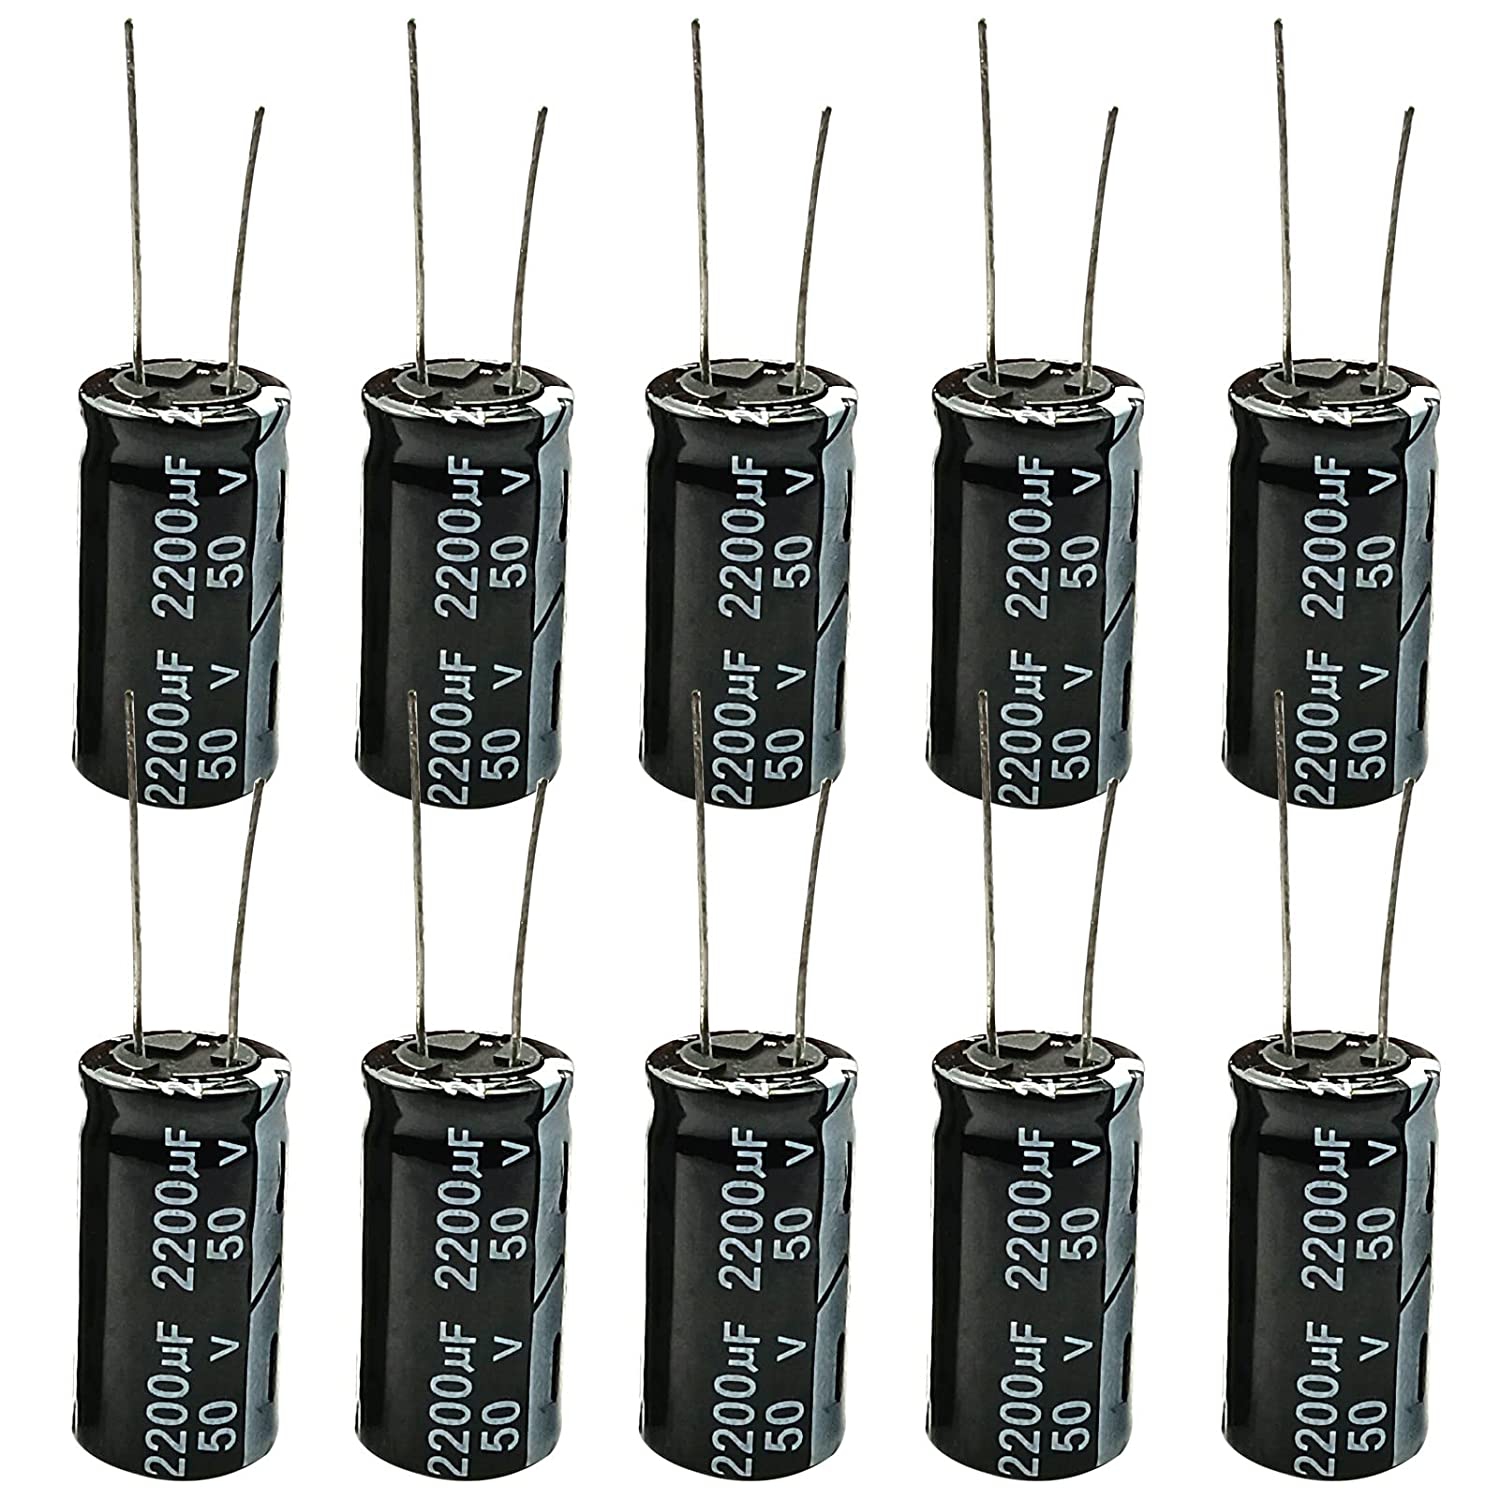 2200uF 50V Capacitor,JIADONG 10Pcs 16x30mm 2200uf Capacitor,50V Electrolytic Capacitor Assortment for DIY Soldering Electronic Projects Compatible with Arduino Kits